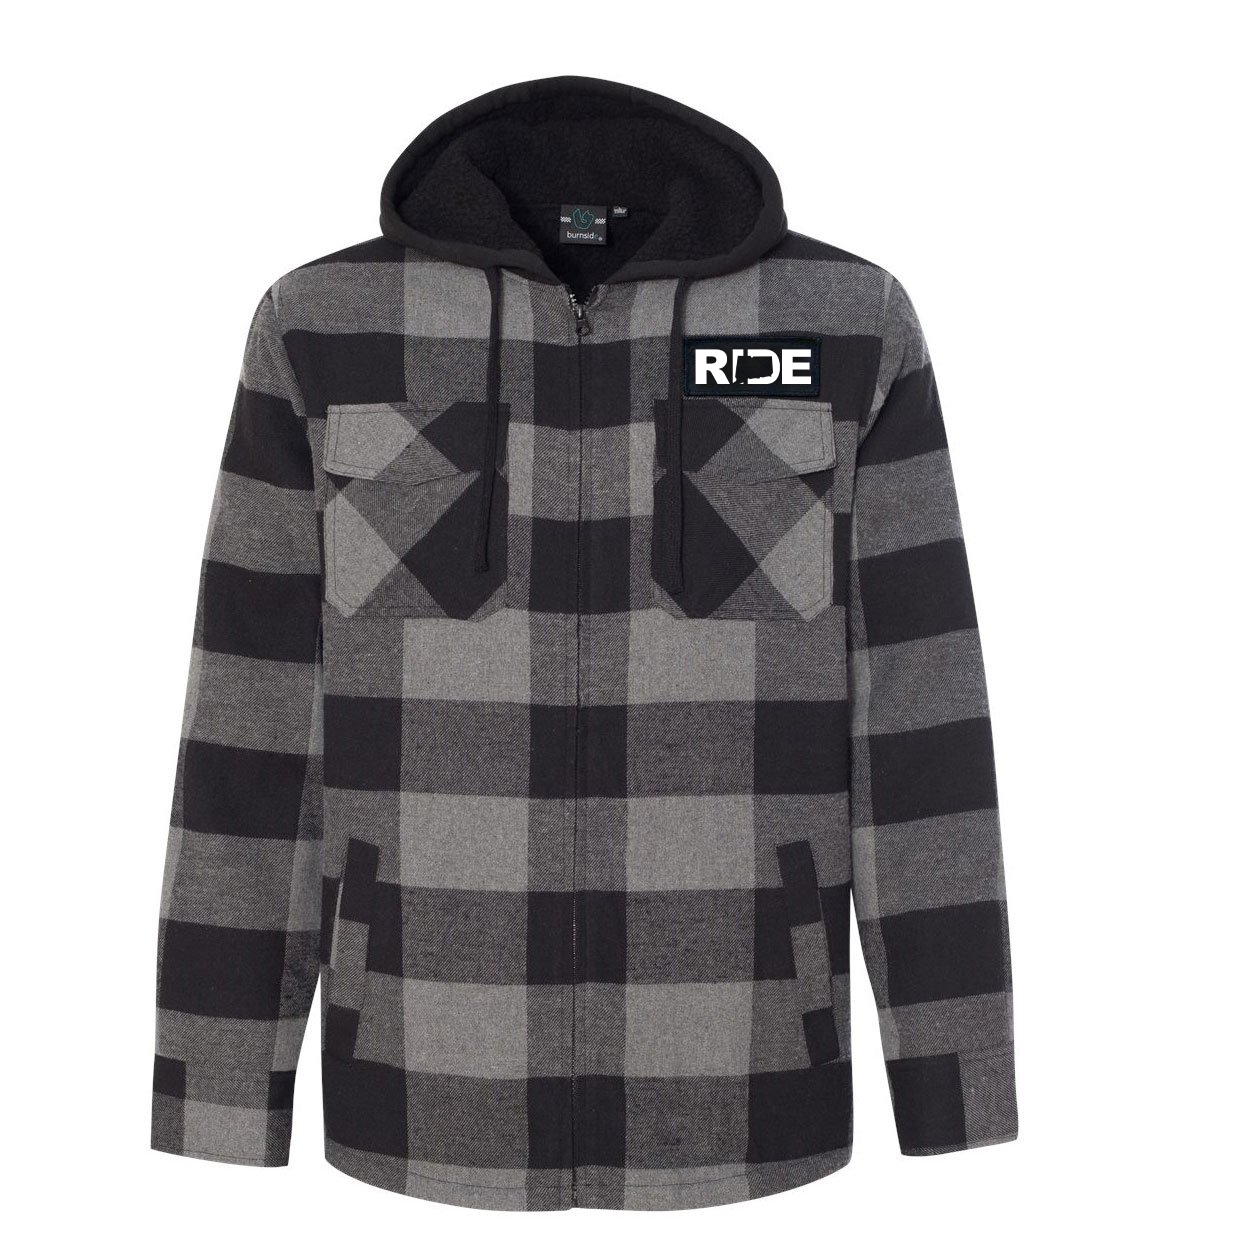 Ride Connecticut Classic Unisex Full Zip Woven Patch Hooded Flannel Jacket Black/Gray (White Logo)